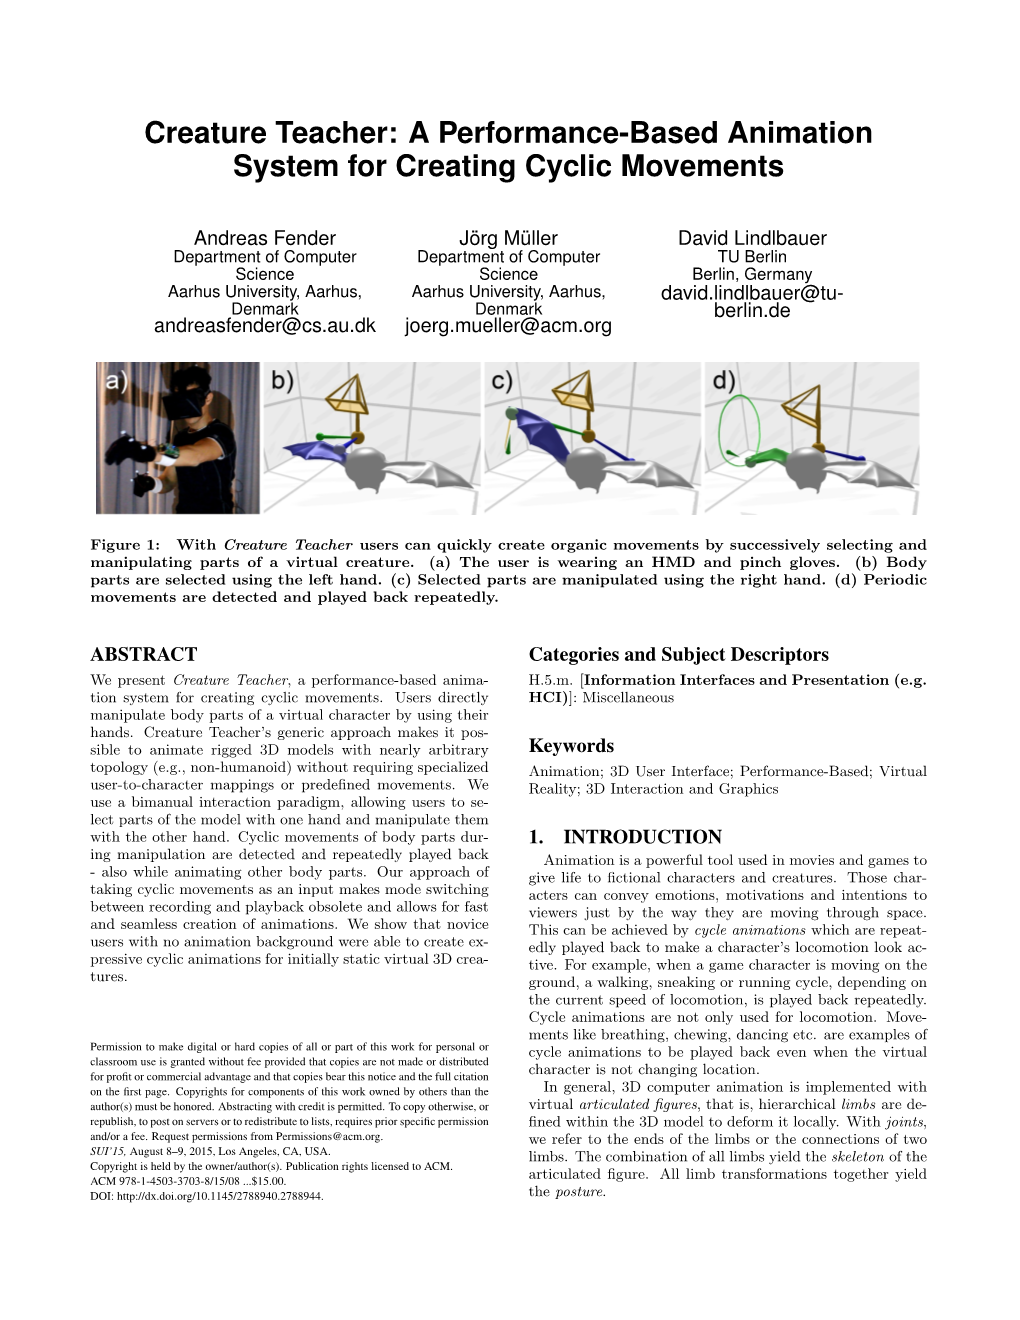 Creature Teacher: a Performance-Based Animation System for Creating Cyclic Movements